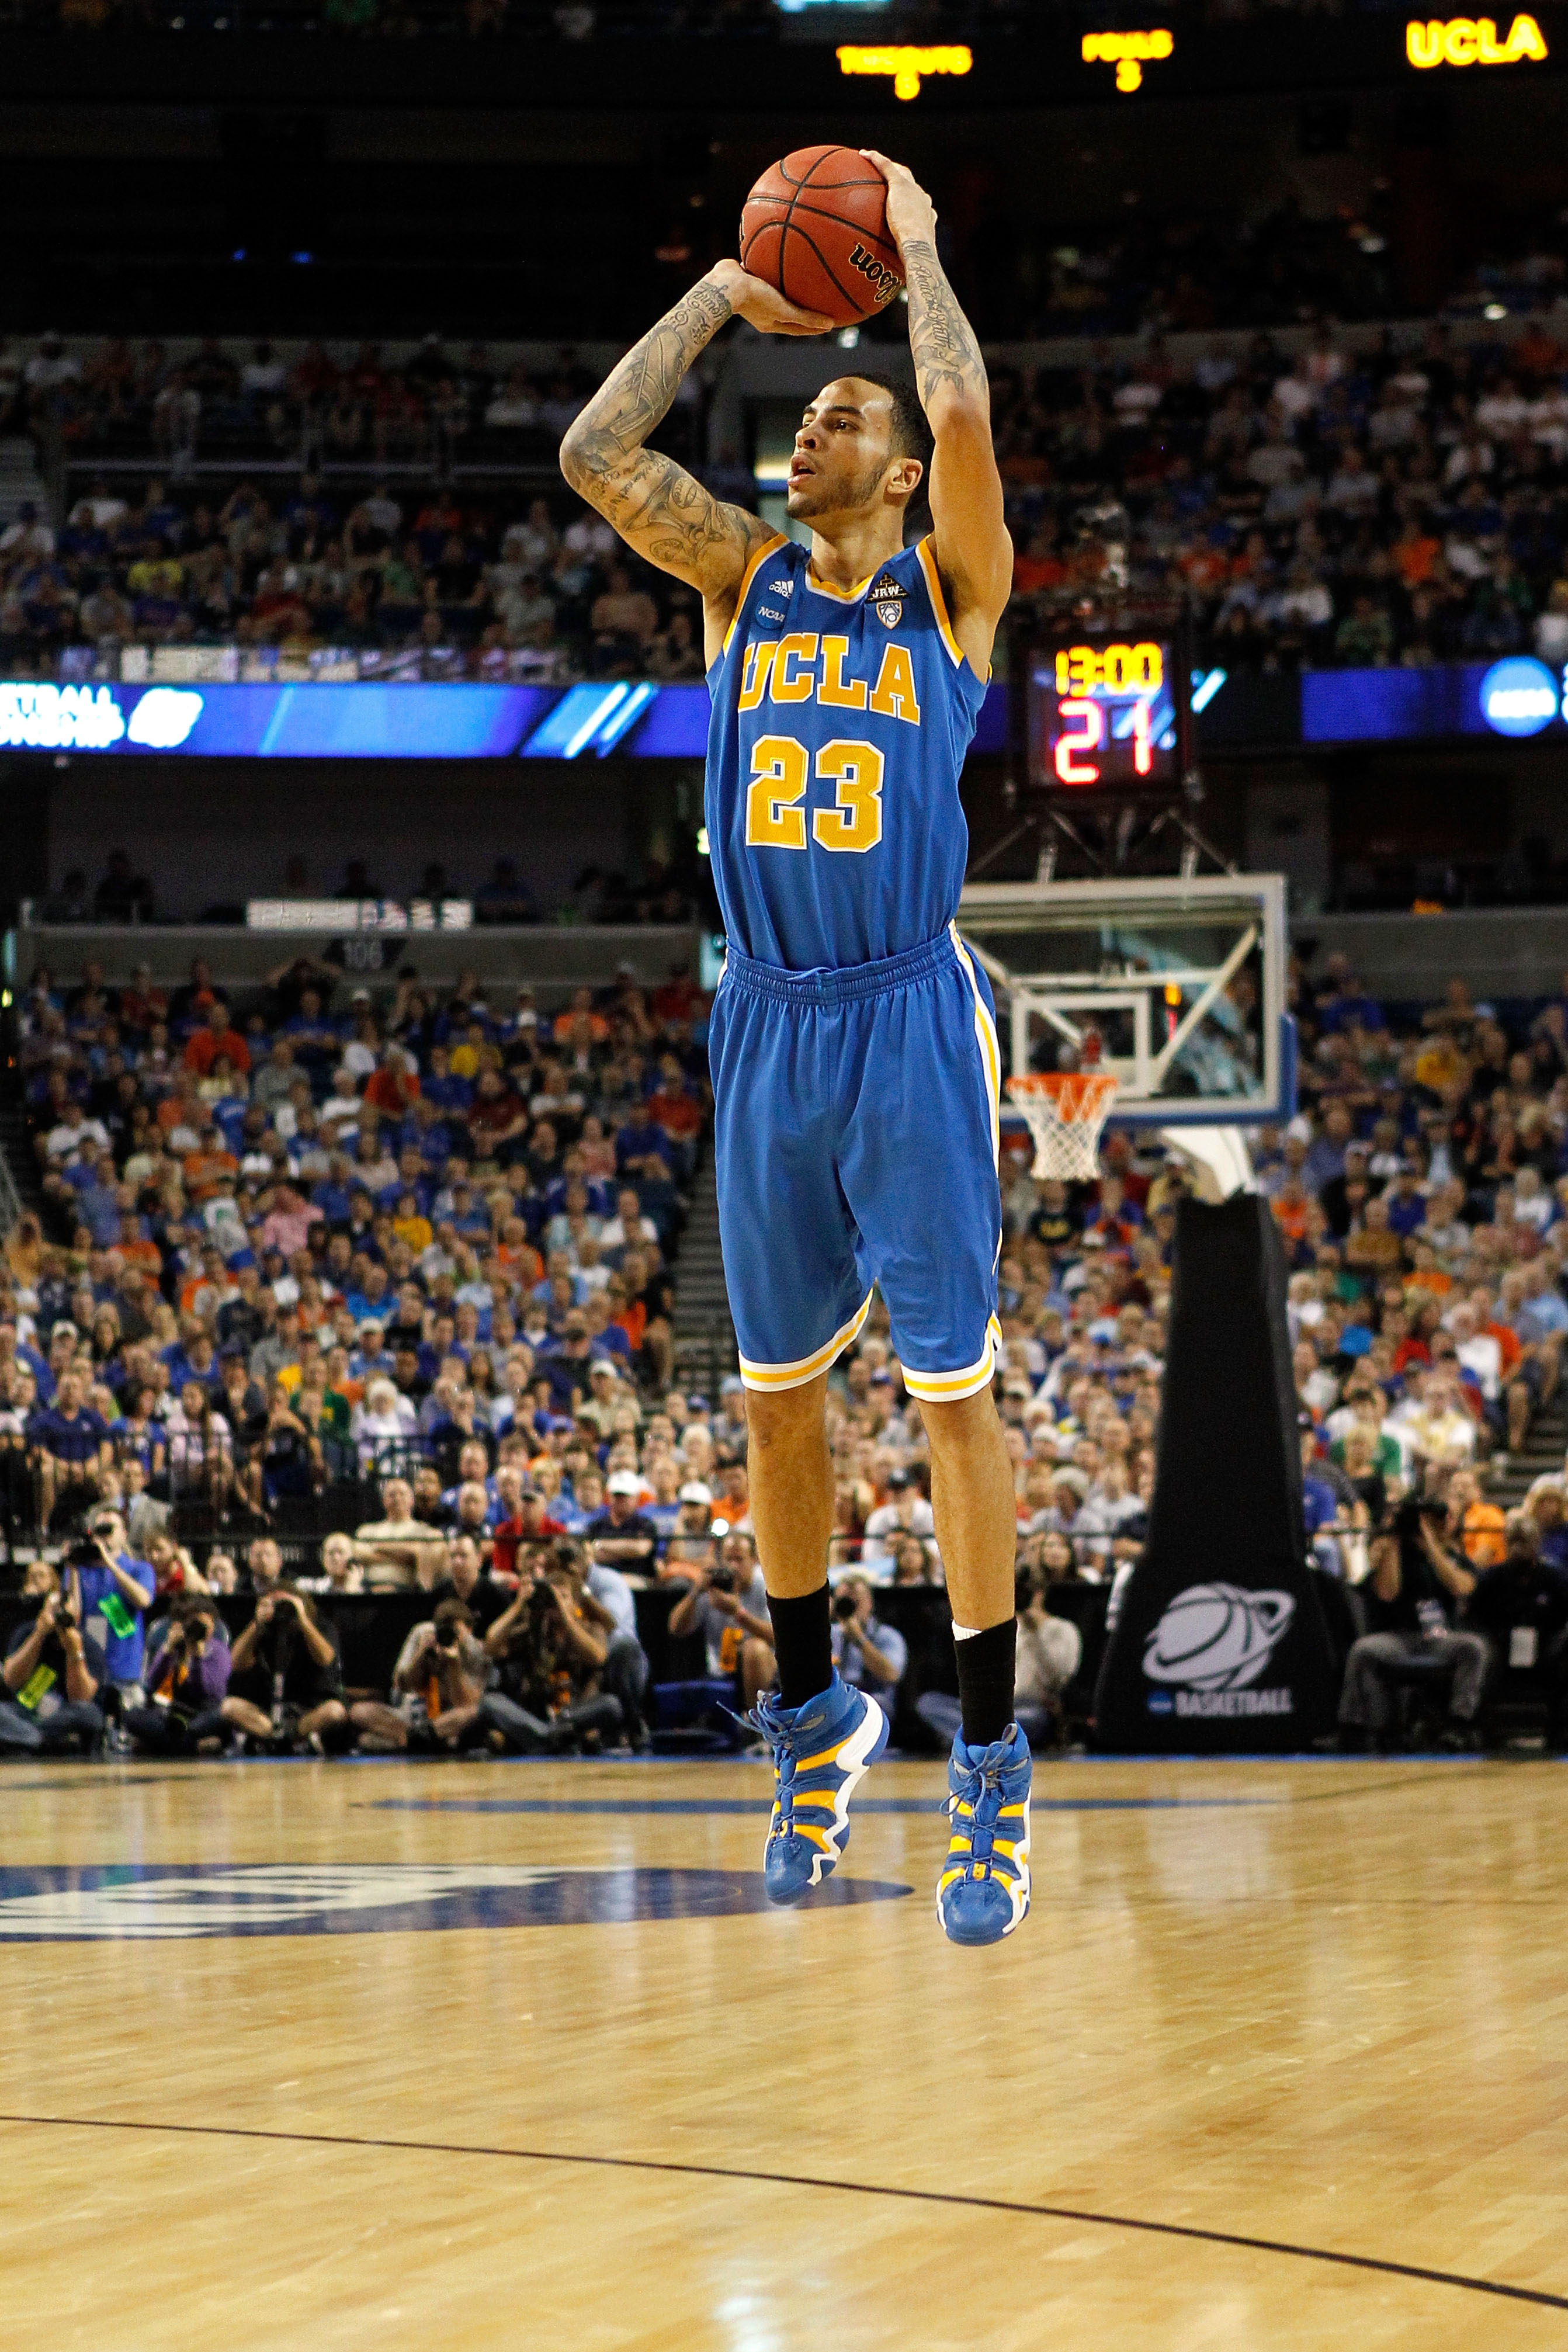 TAMPA, FL - MARCH 19:  Tyler Honeycutt #23 of the UCLA Bruins attempts a shot agaisnt the Florida Gators during the third round of the 2011 NCAA men's basketball tournament at St. Pete Times Forum on March 19, 2011 in Tampa, Florida. Florida won 73-65. (P